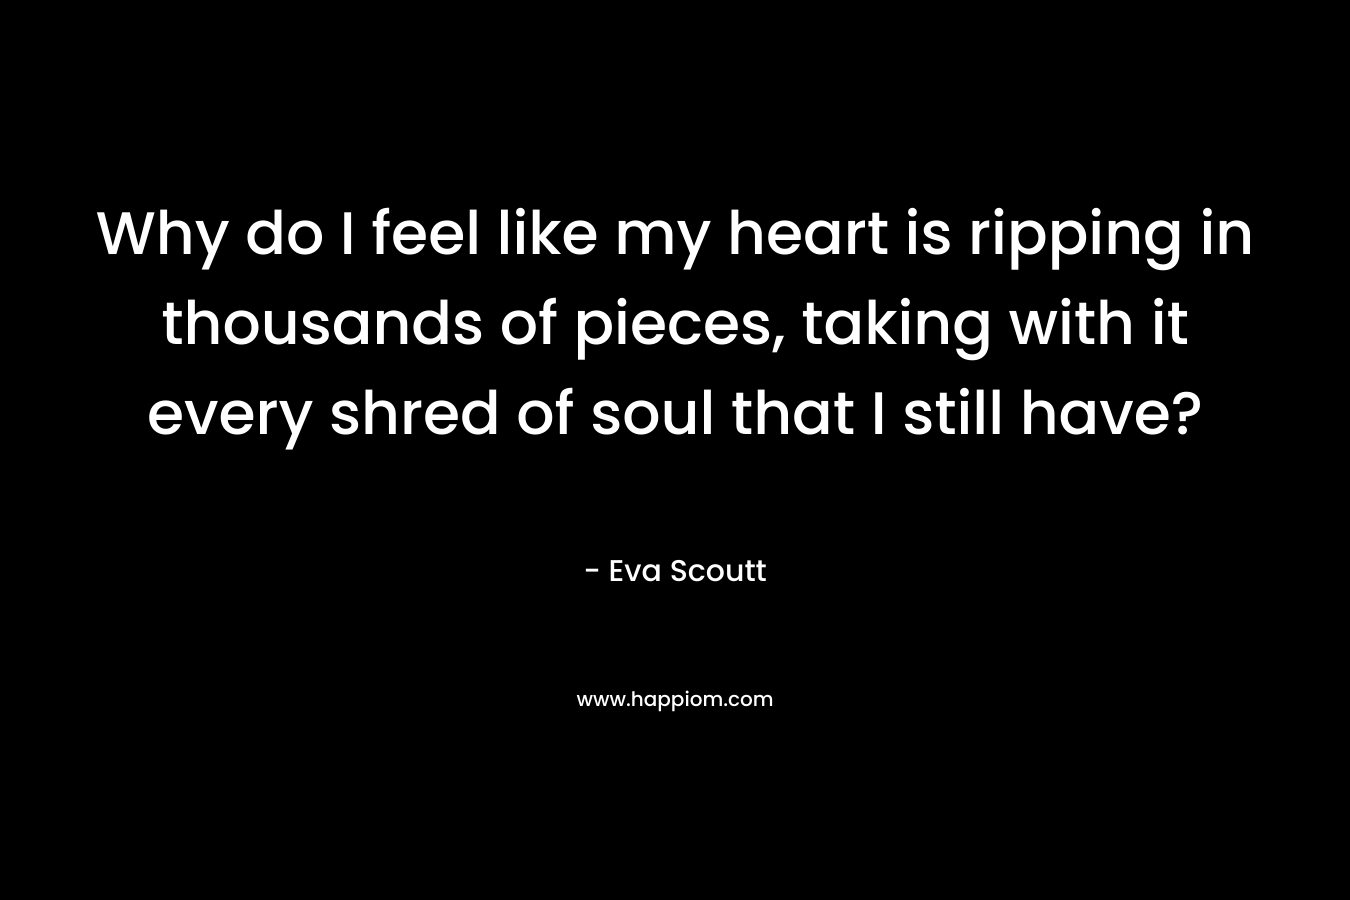 Why do I feel like my heart is ripping in thousands of pieces, taking with it every shred of soul that I still have? – Eva Scoutt